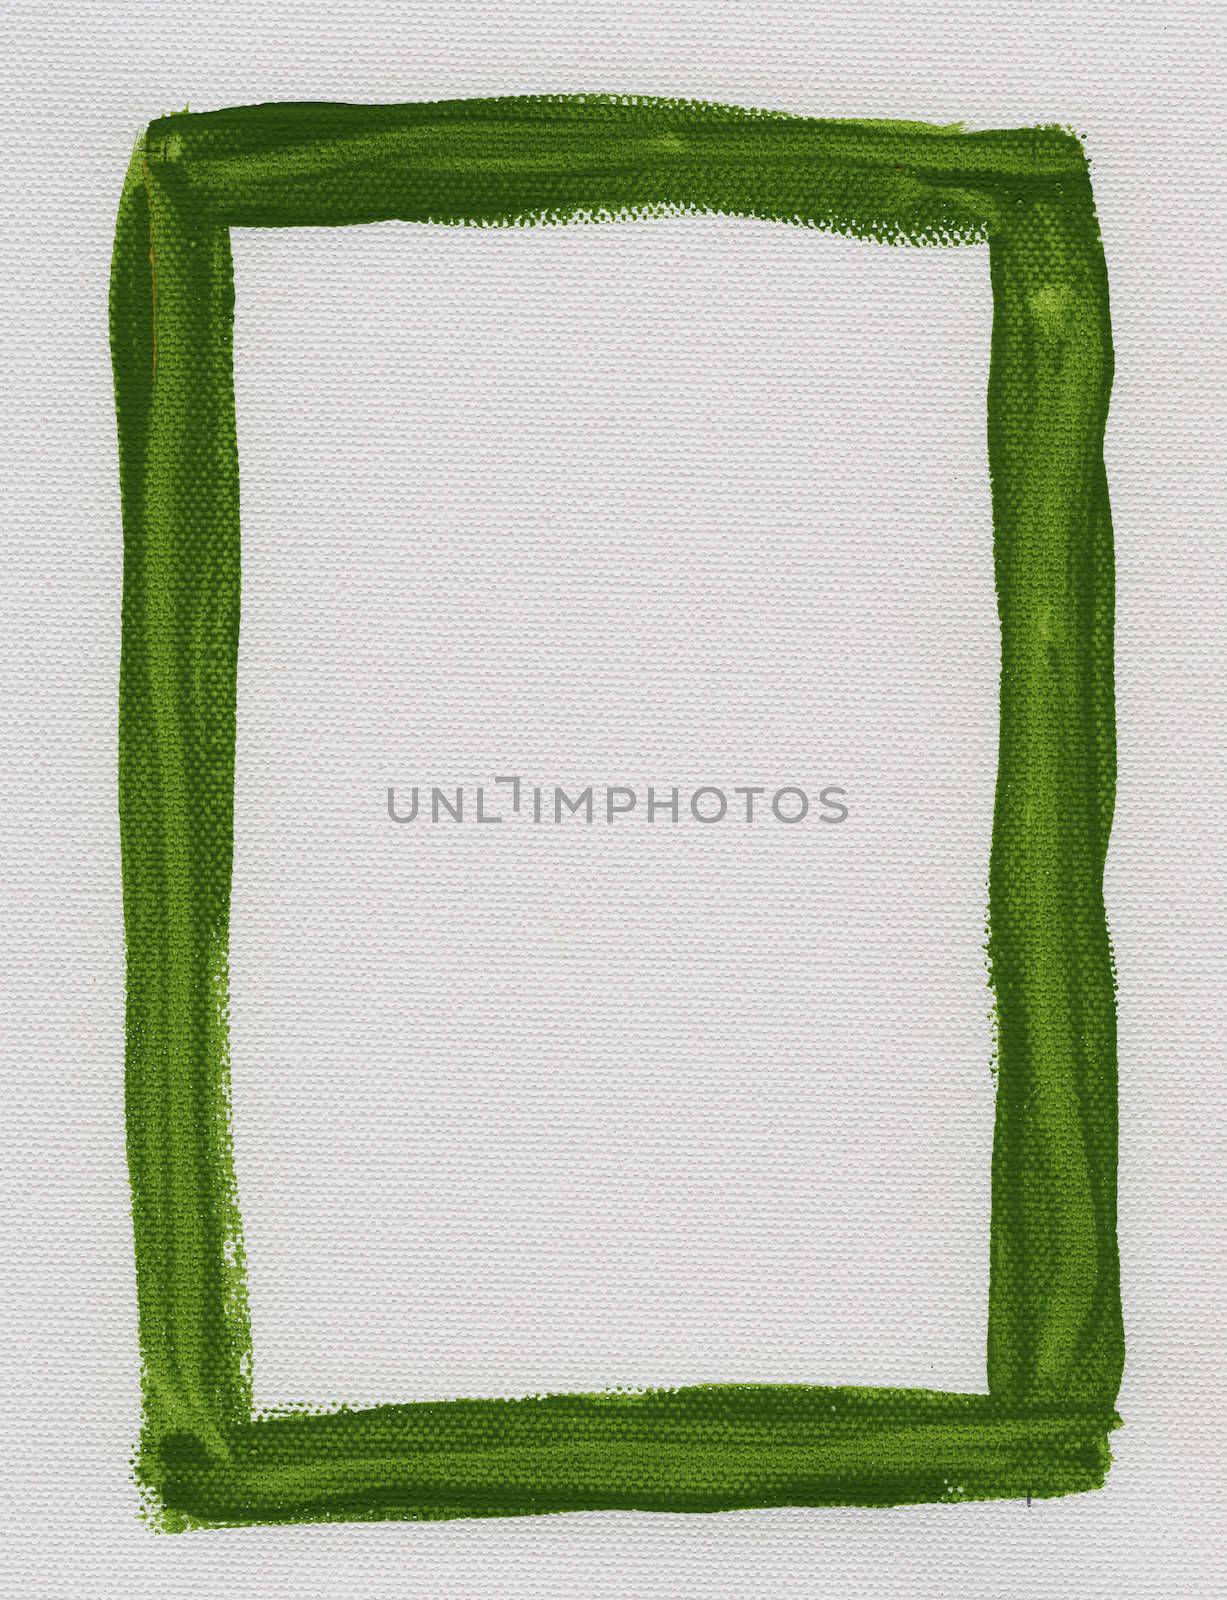 green frame painted on white canvas by PixelsAway